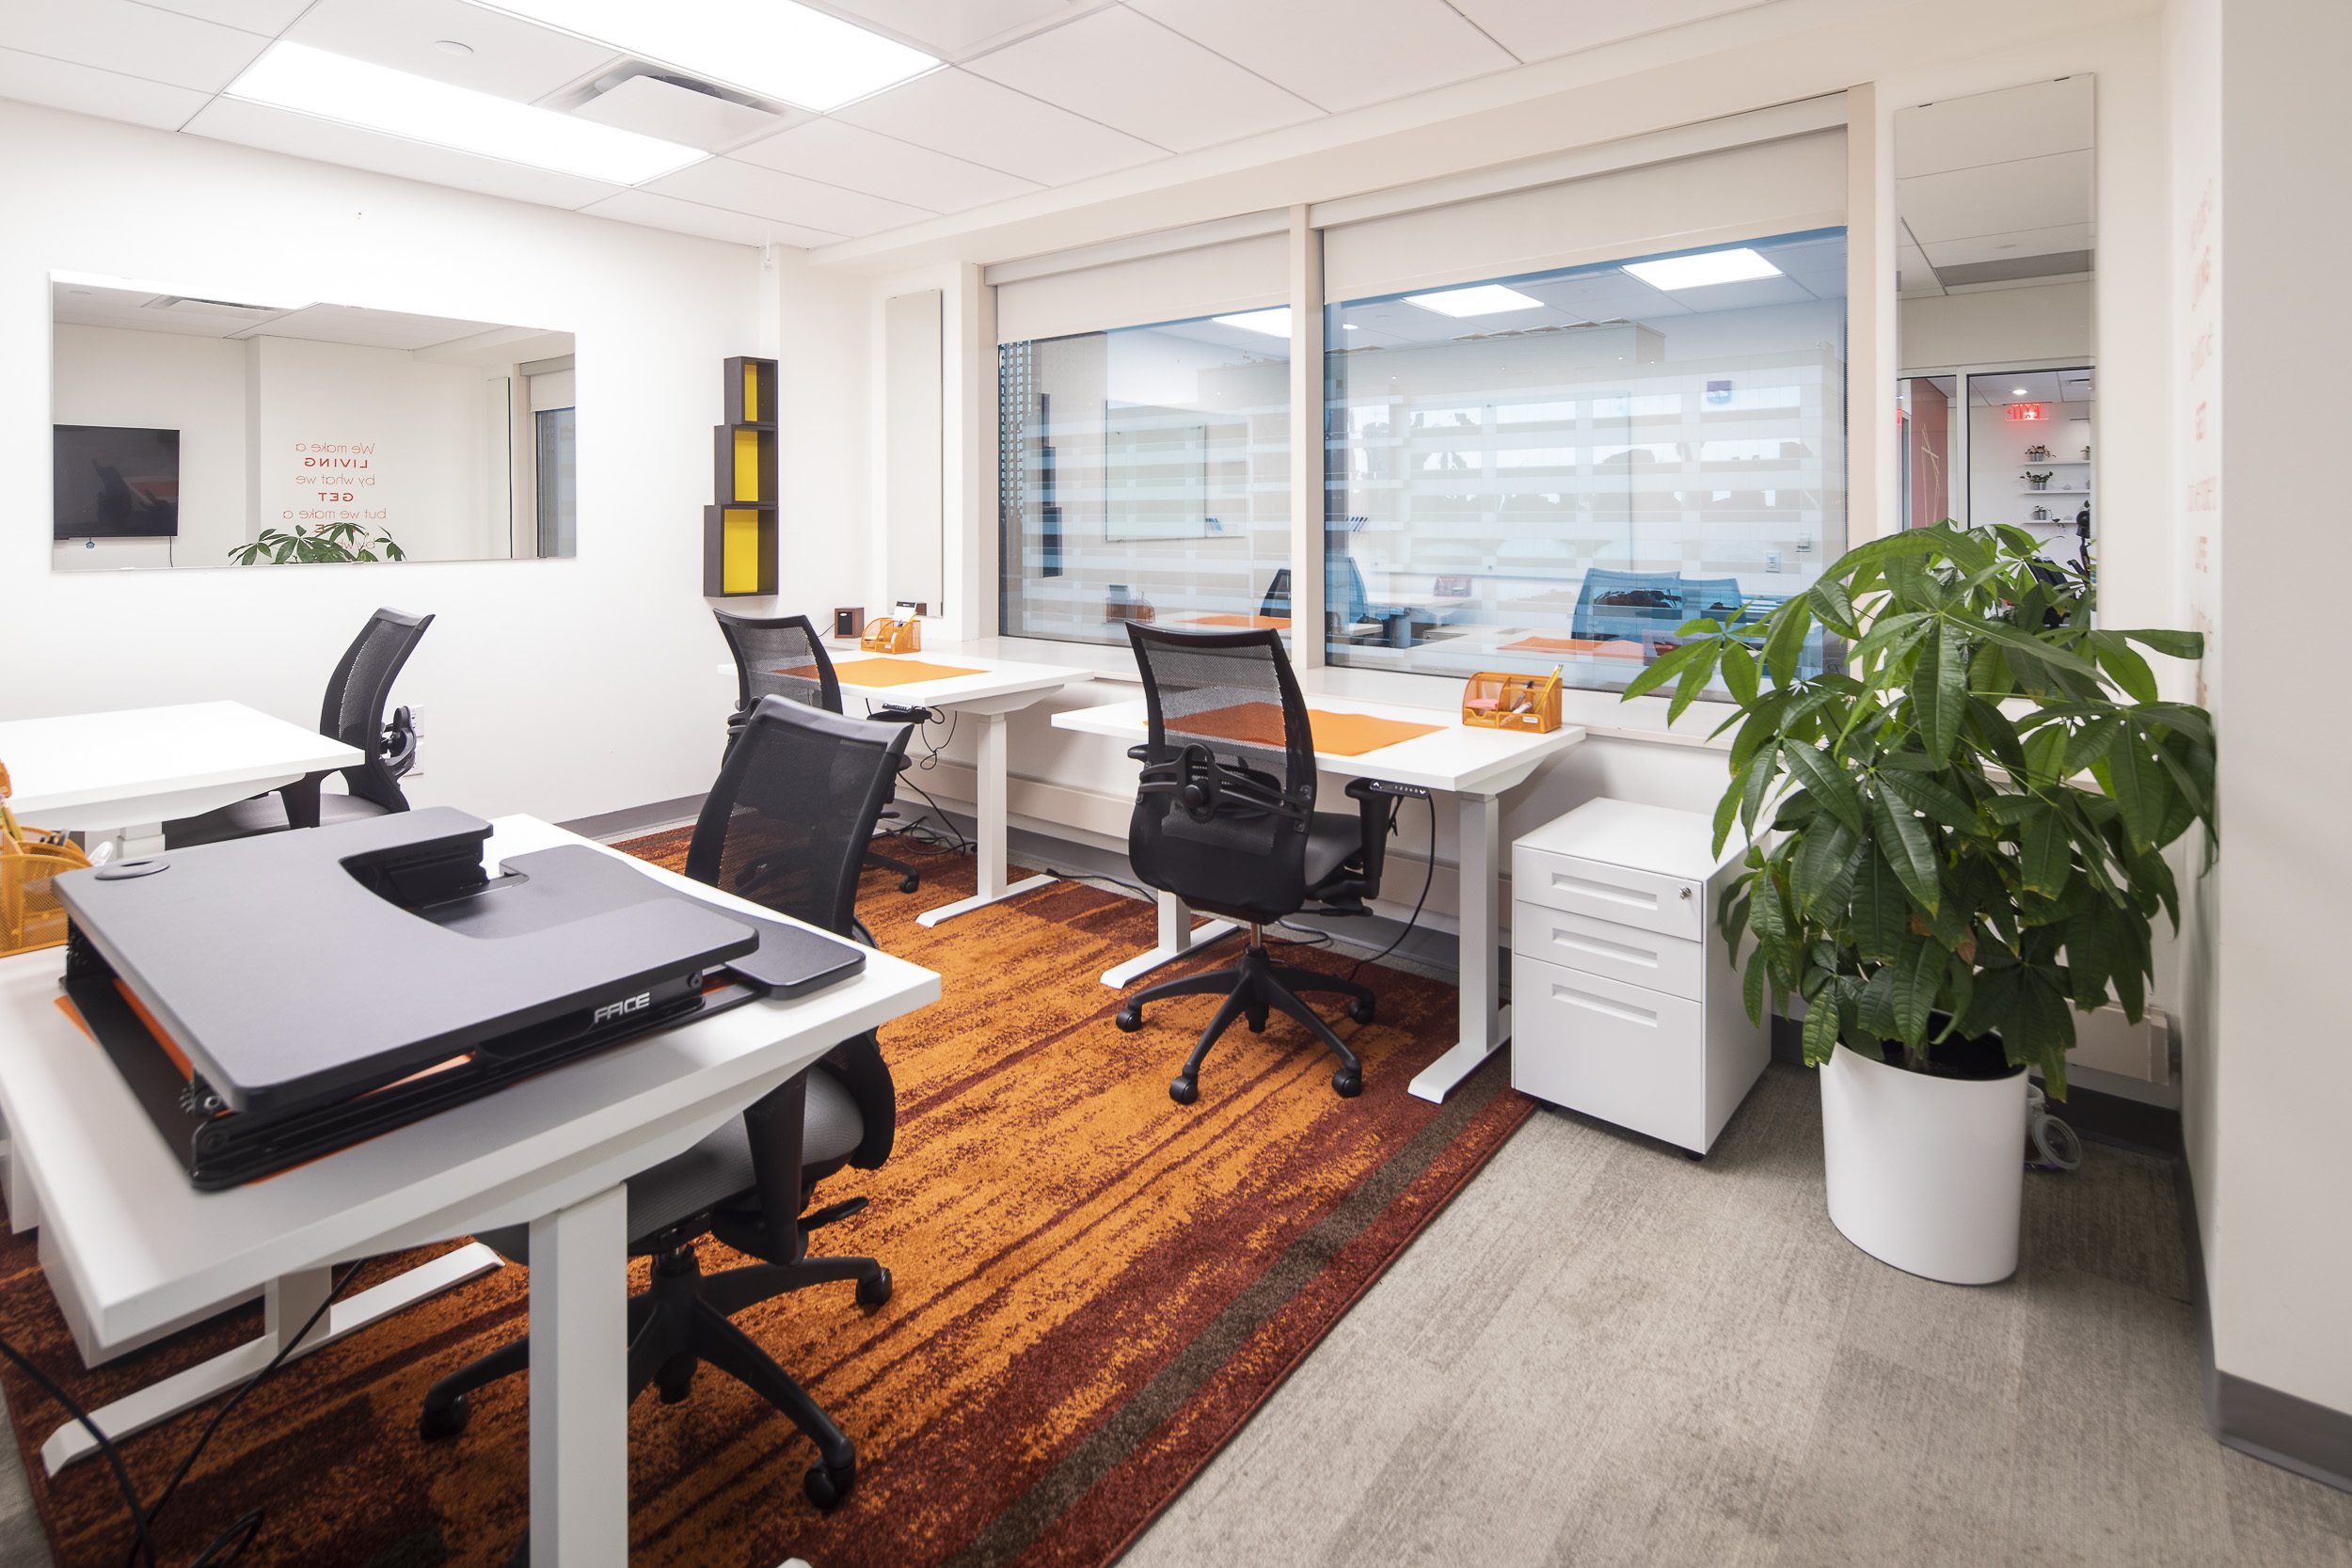 Rent private office space with high-speed wifi access, wireless printing and much more